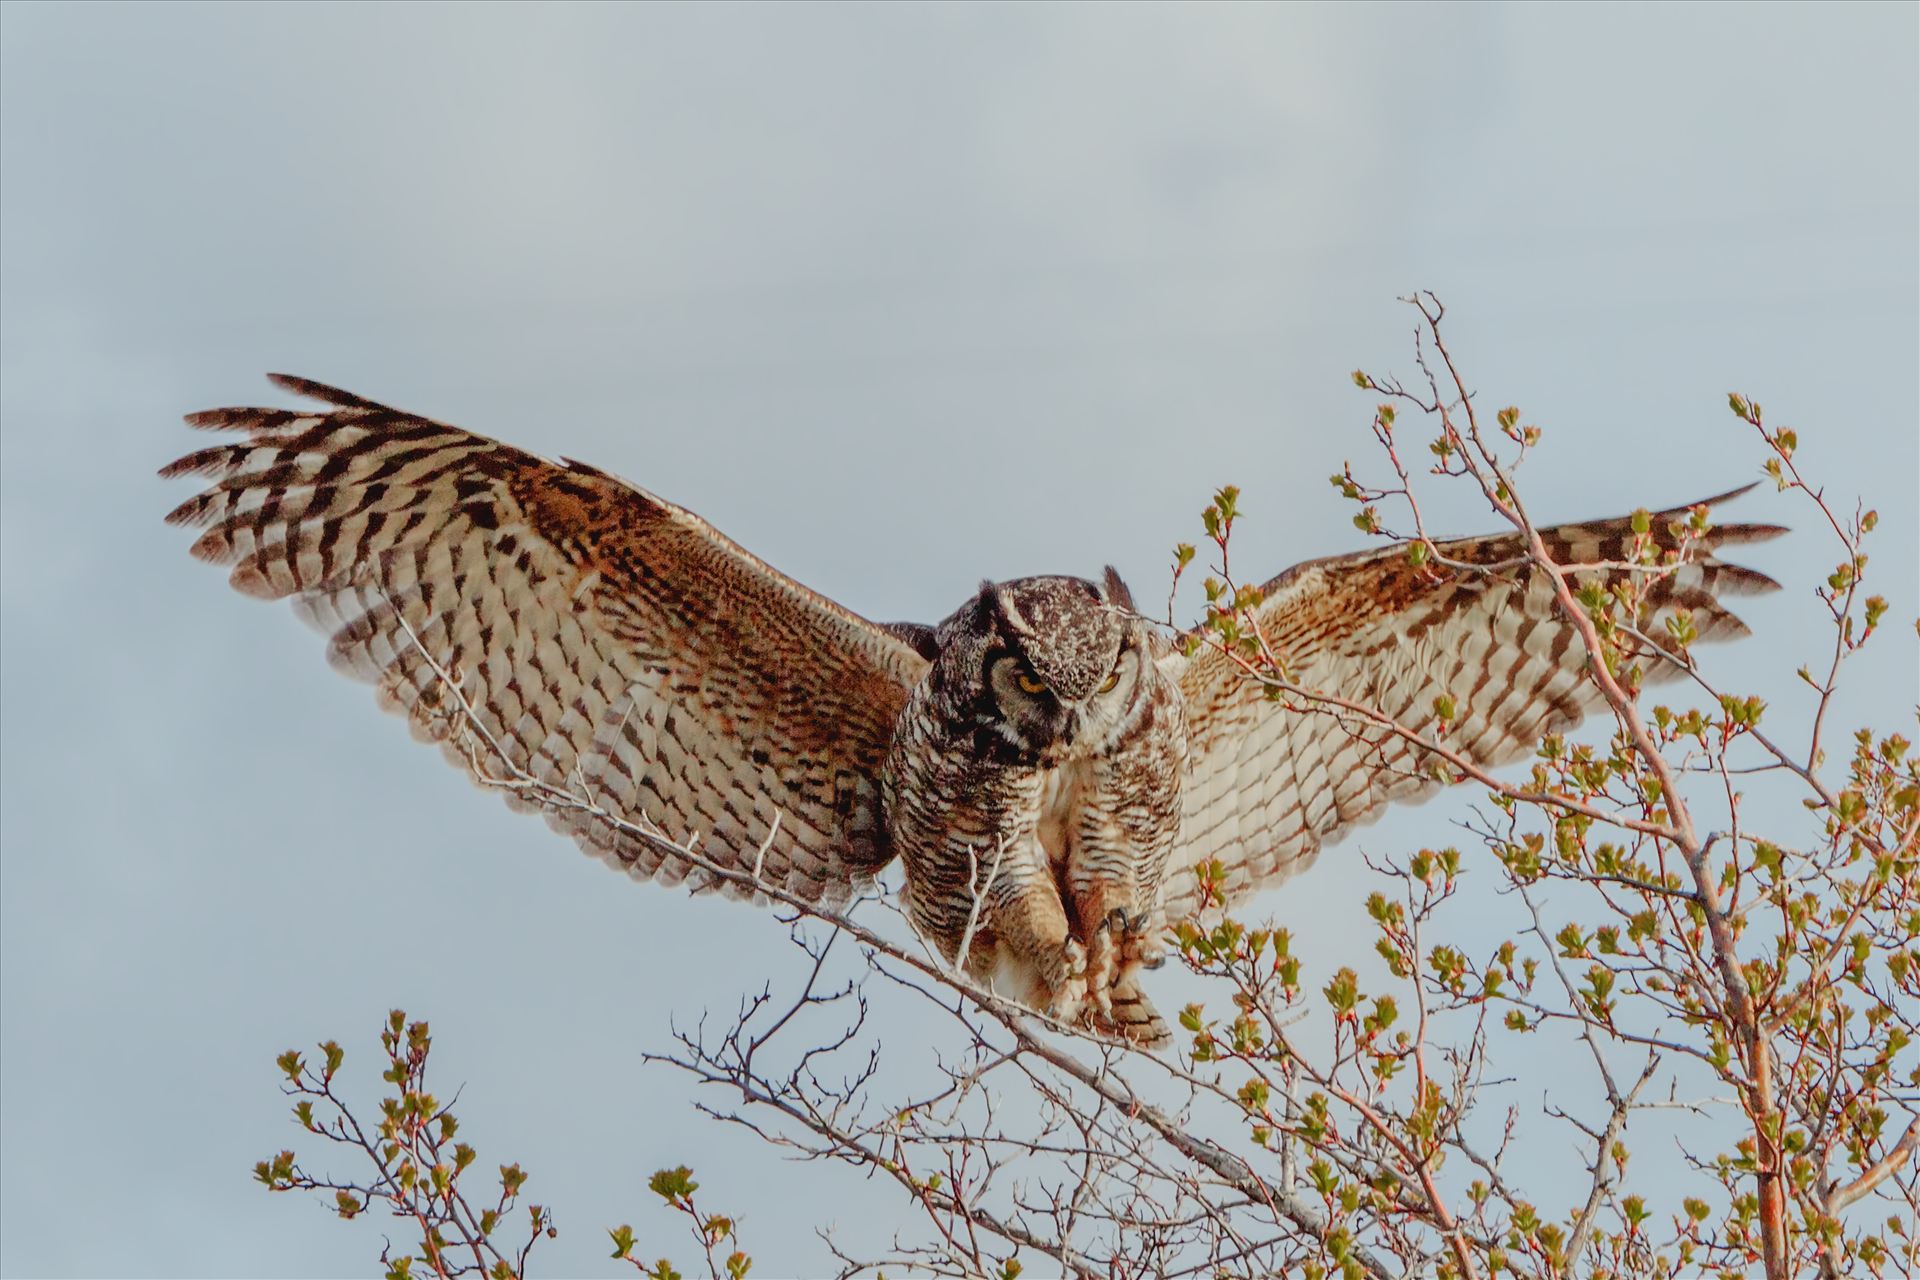 Landing Gear Down - Female Great Horned Owl, with claws outstretched as she is ready to land in the tree by Bear Conceptions Photography